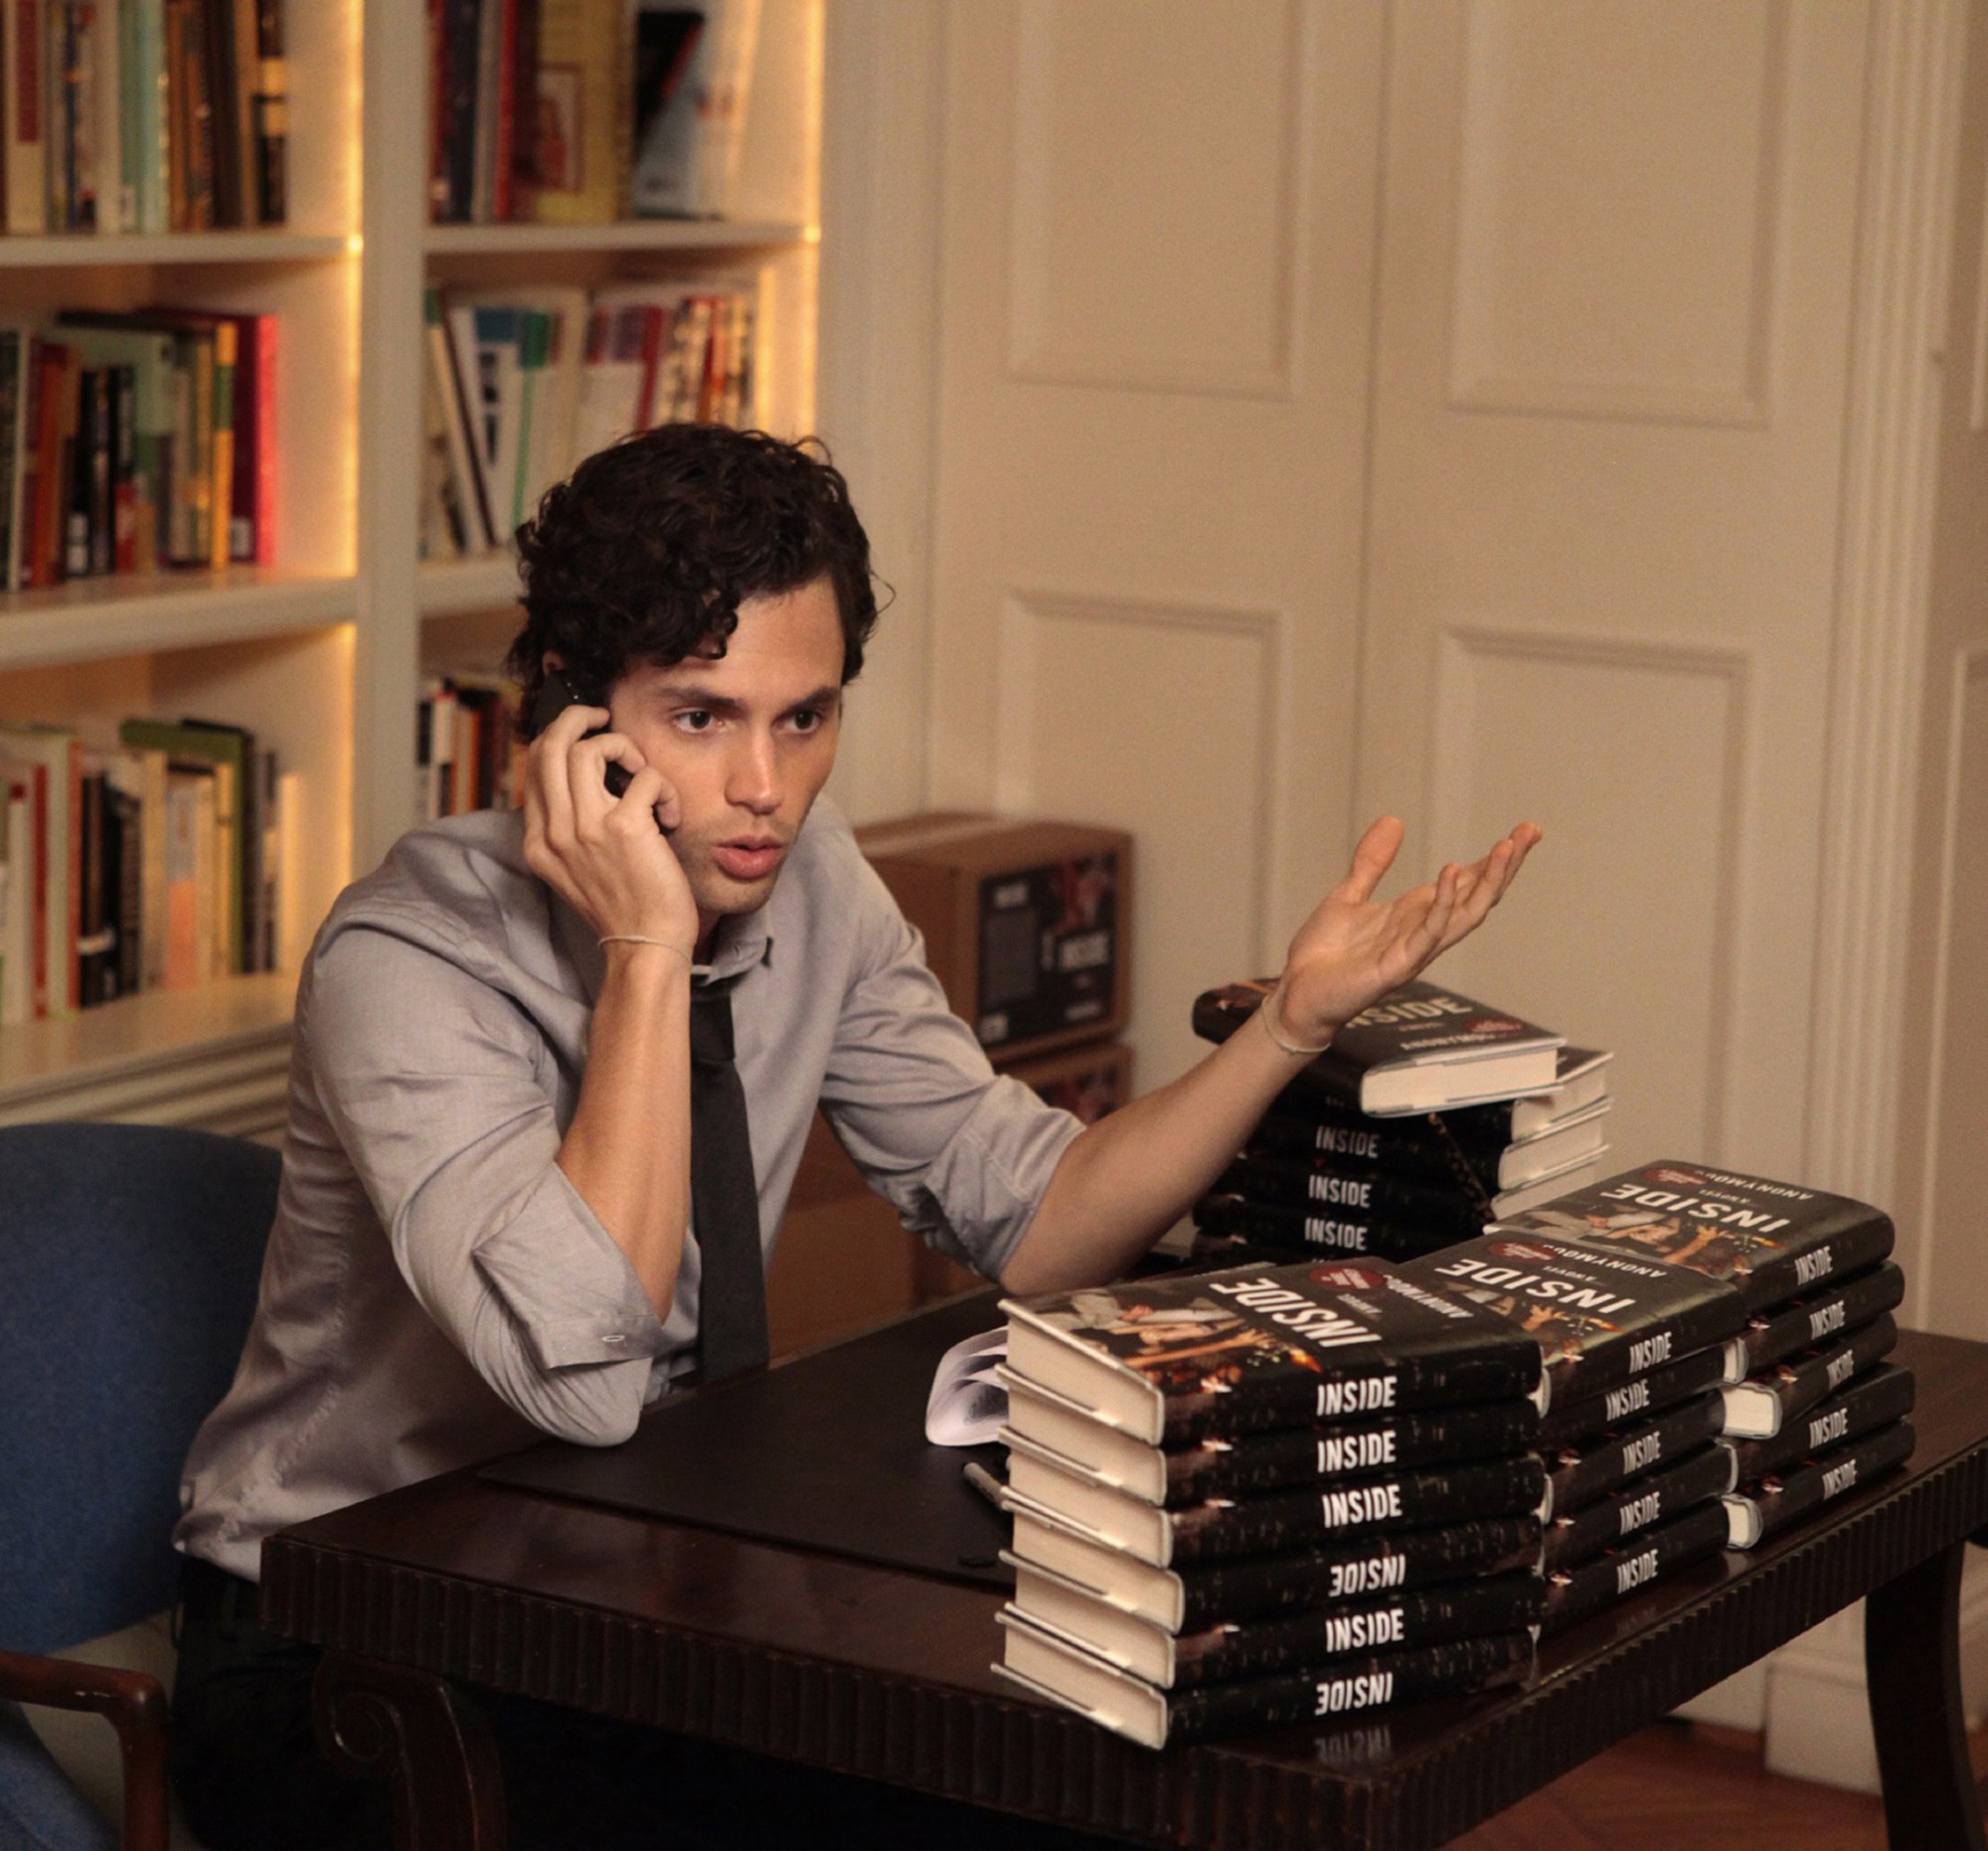 dan on the phone at a desk full of his books